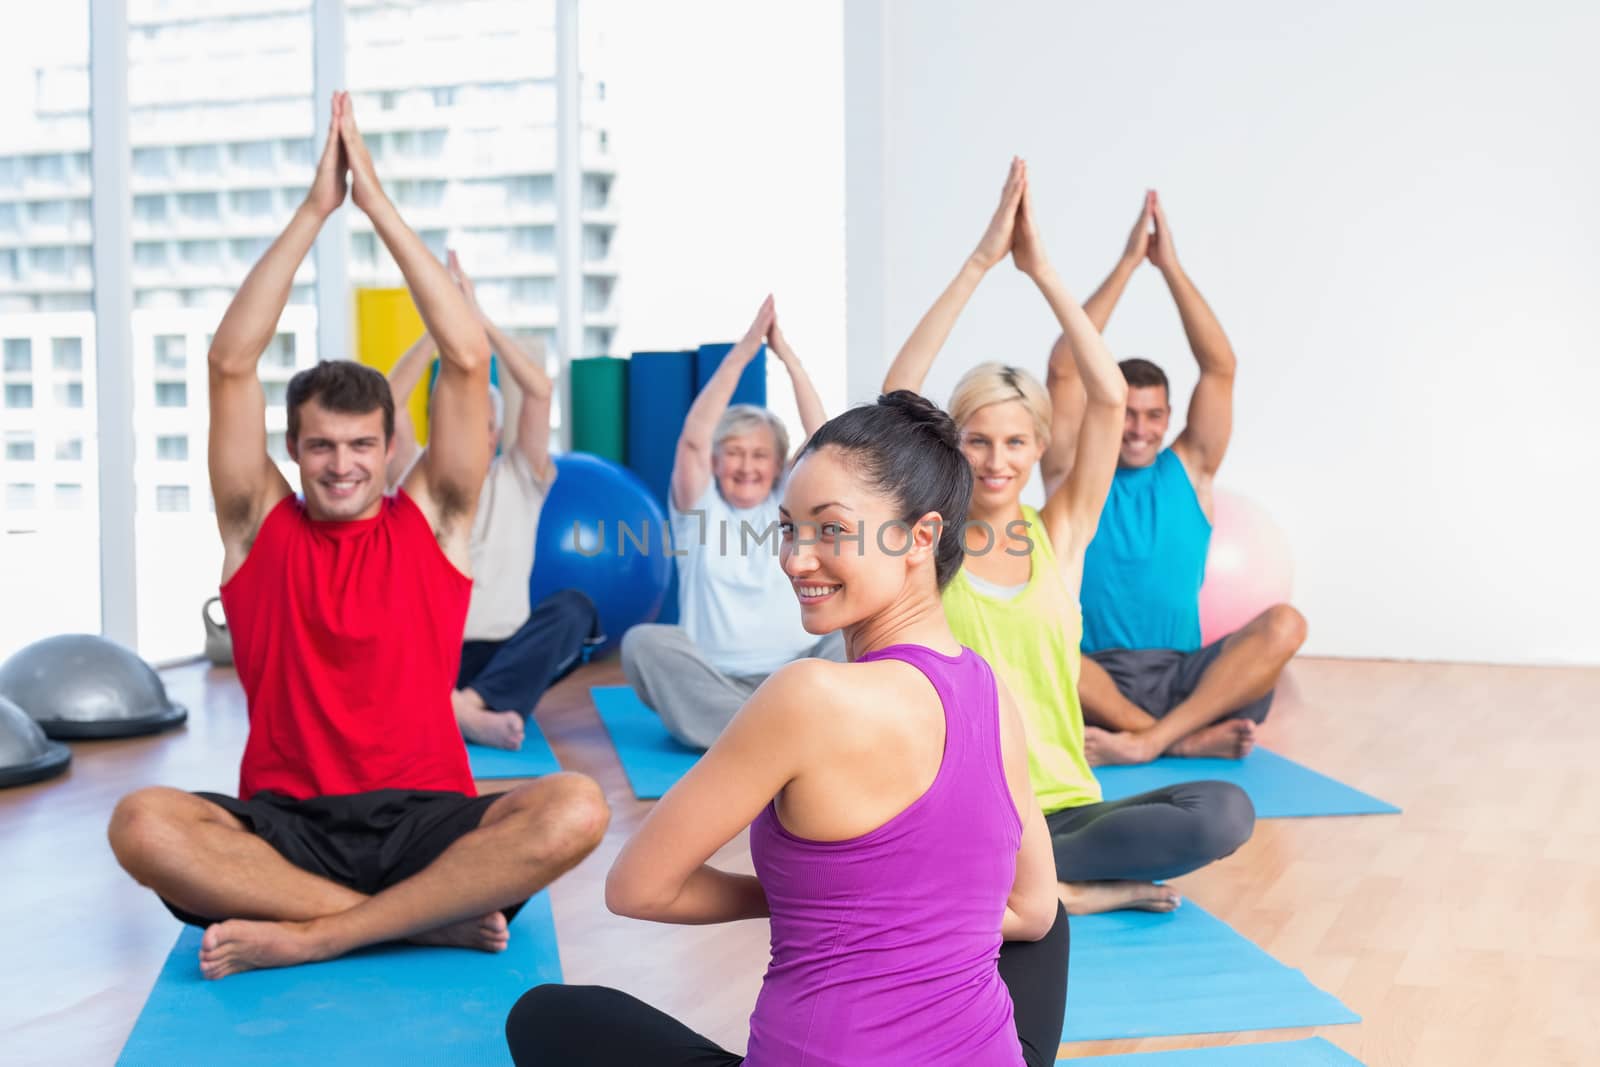 Instructor with class practicing yoga in fitness studio by Wavebreakmedia